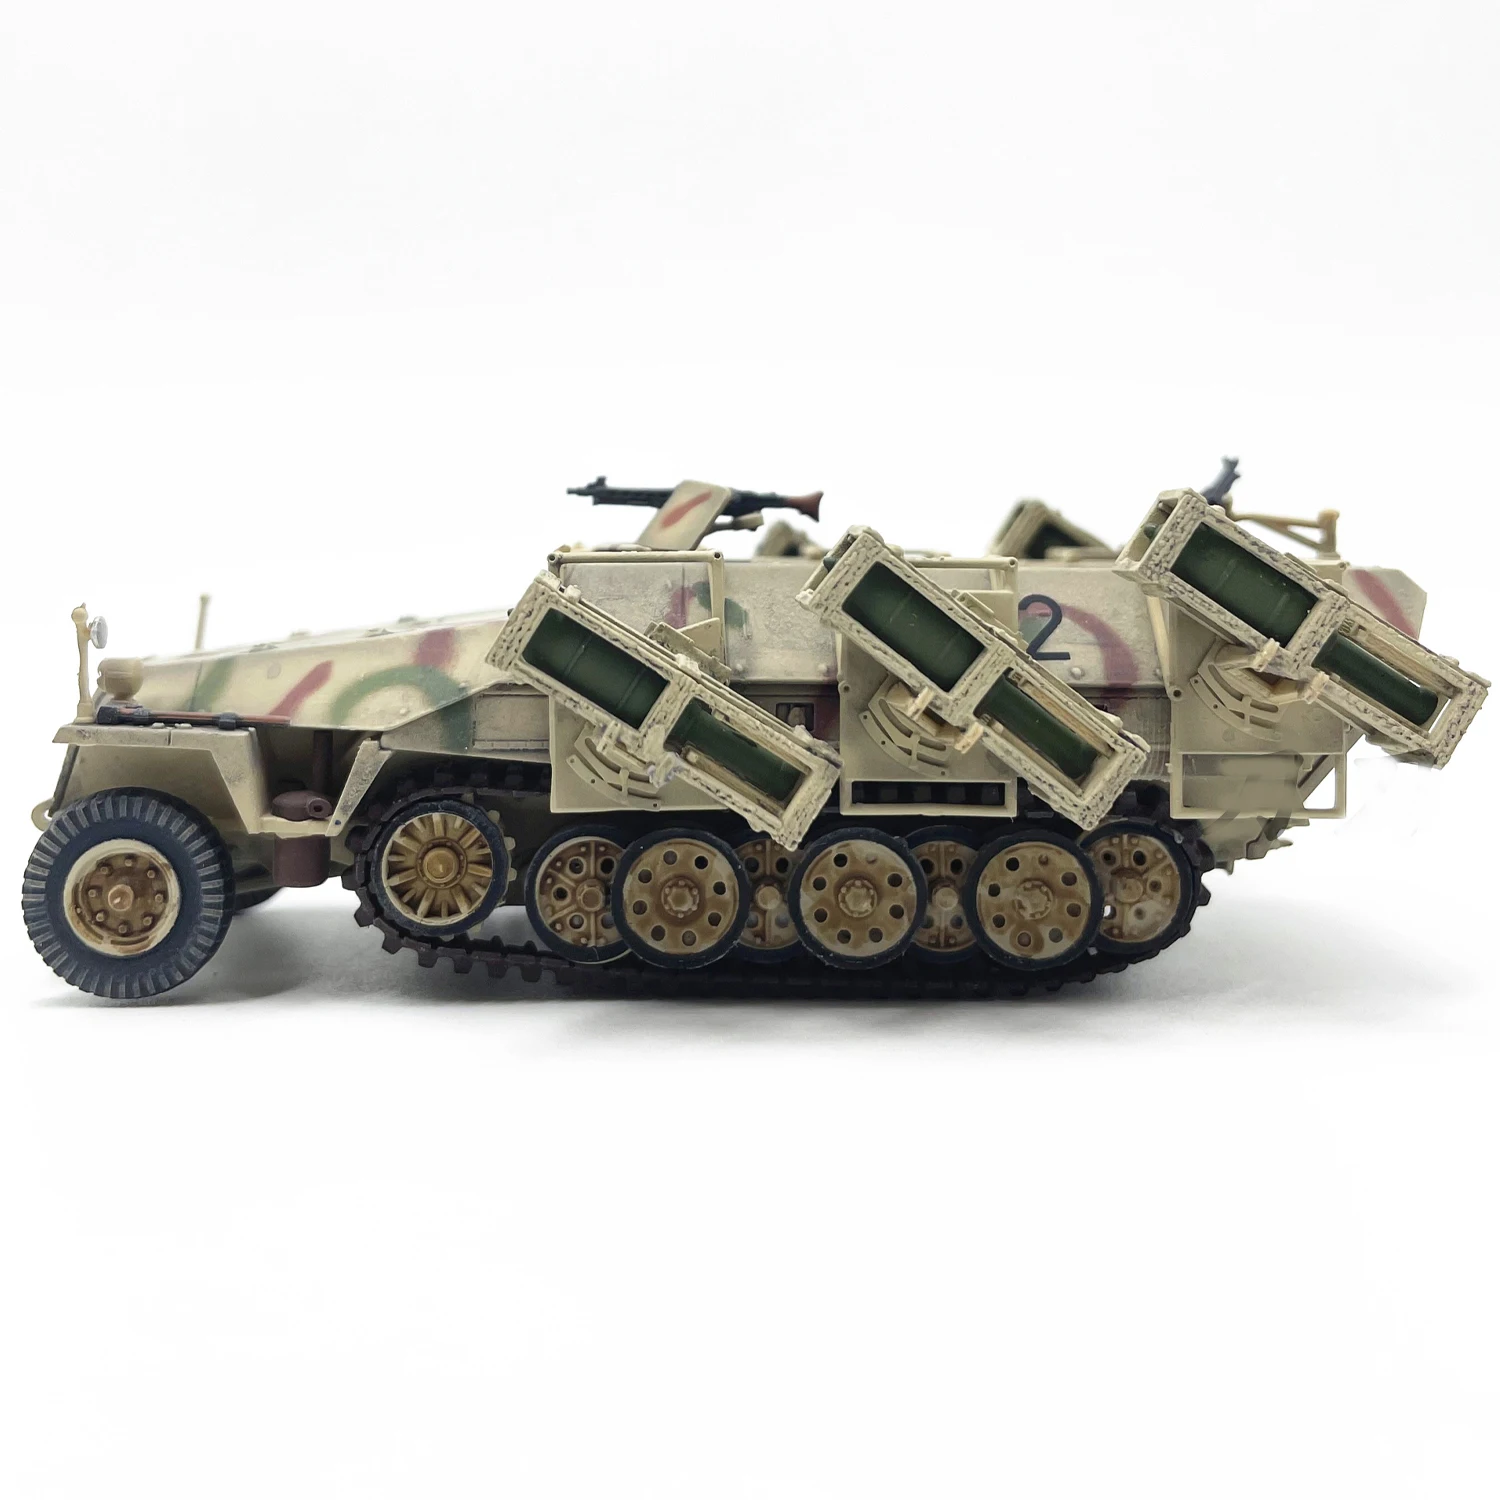 

Plastic Model of German Half Tracked Militarized Combat Armored Vehicle 1:72 Scale Toy Gift Collection Simulation Display